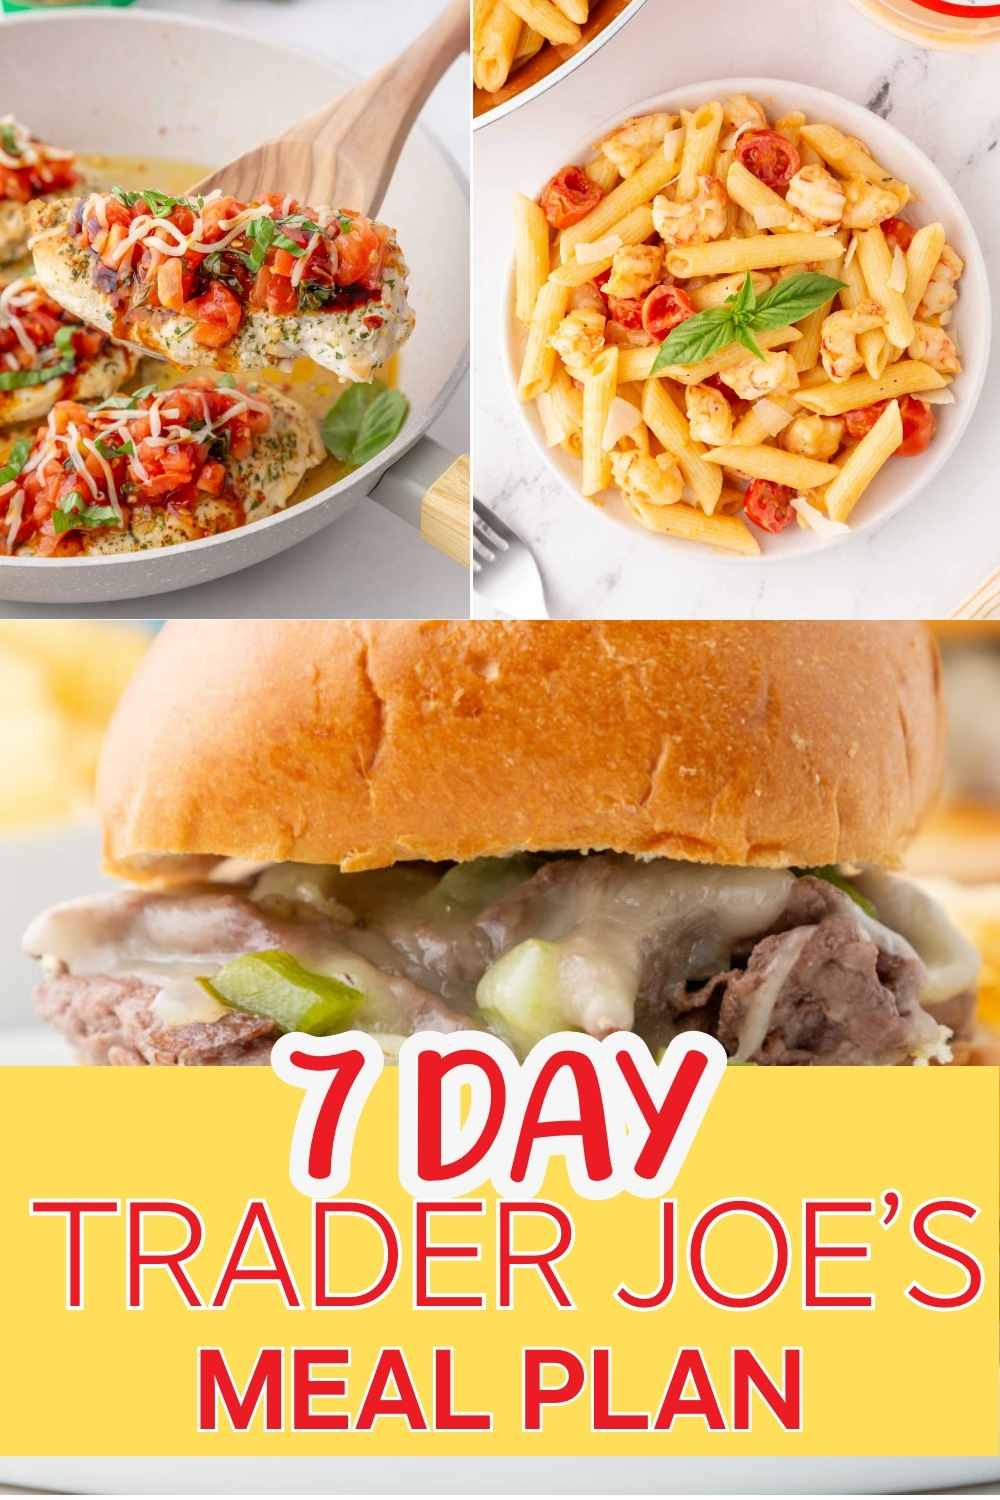 Pinterest Pin showing 3 easy trader joe's dinner ideas from the meal plan.